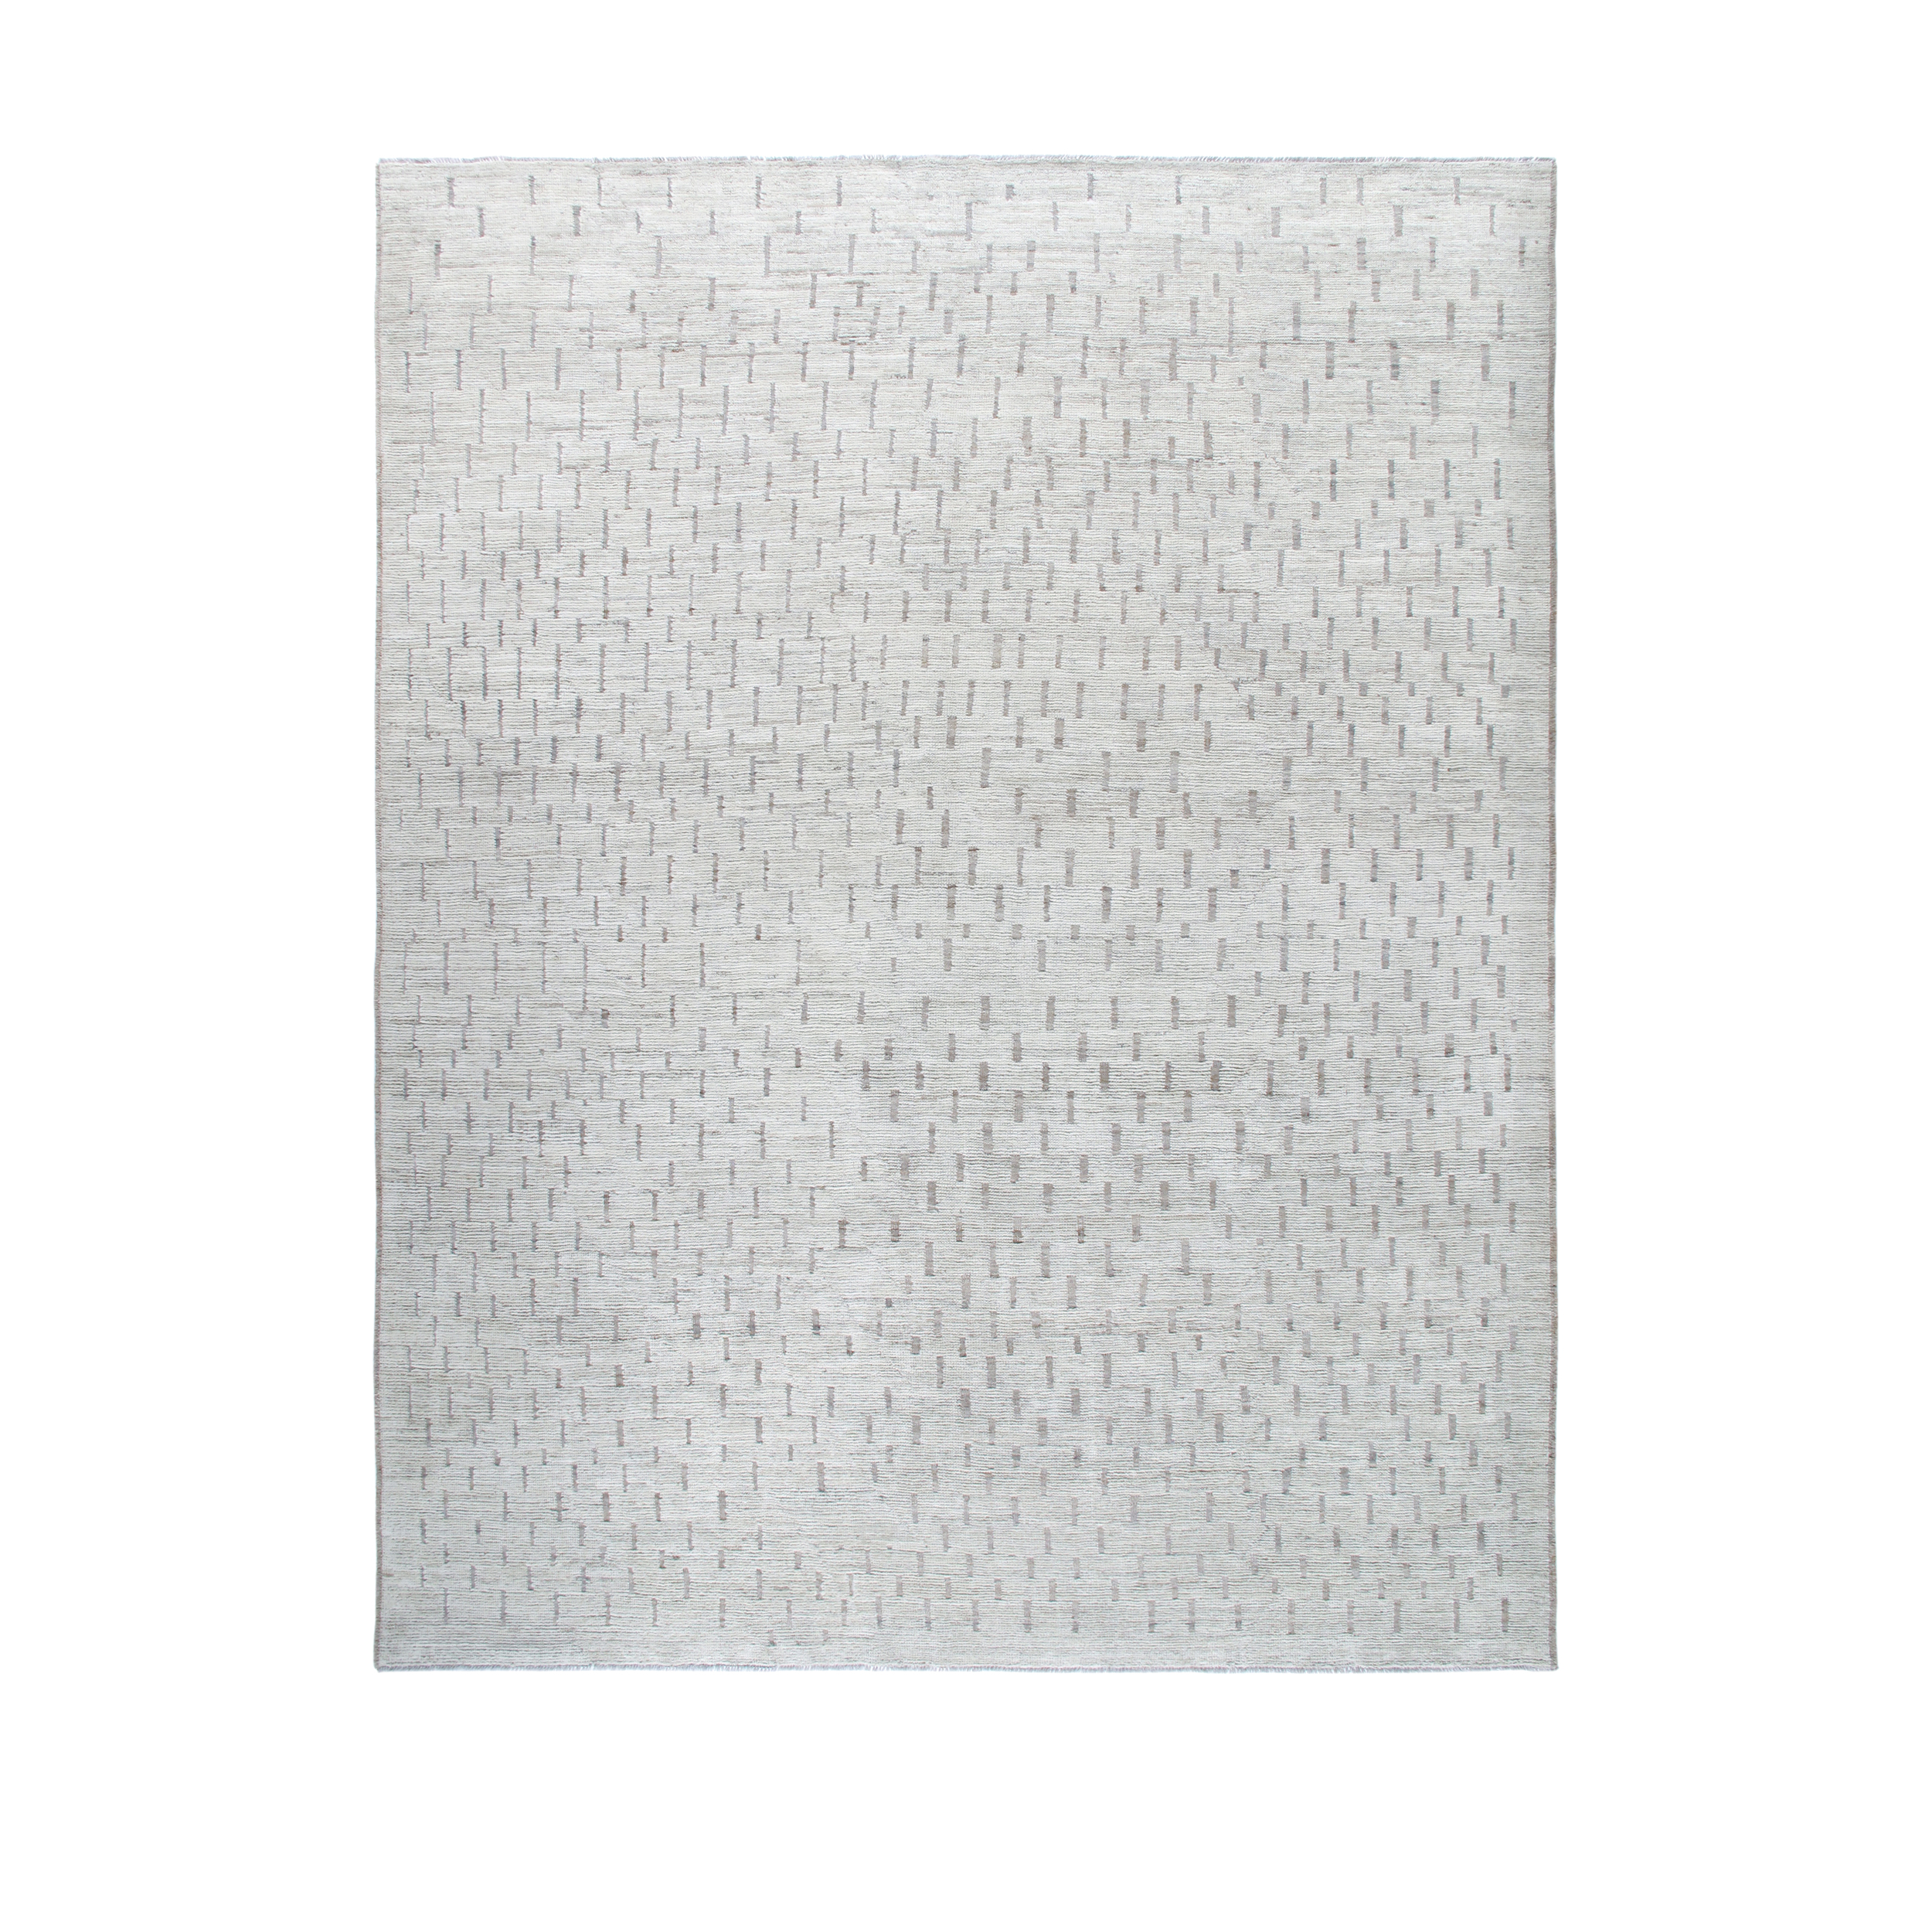 Marbella Rug is a hand-knotted modern piece with a combination of beige and grey tones. 